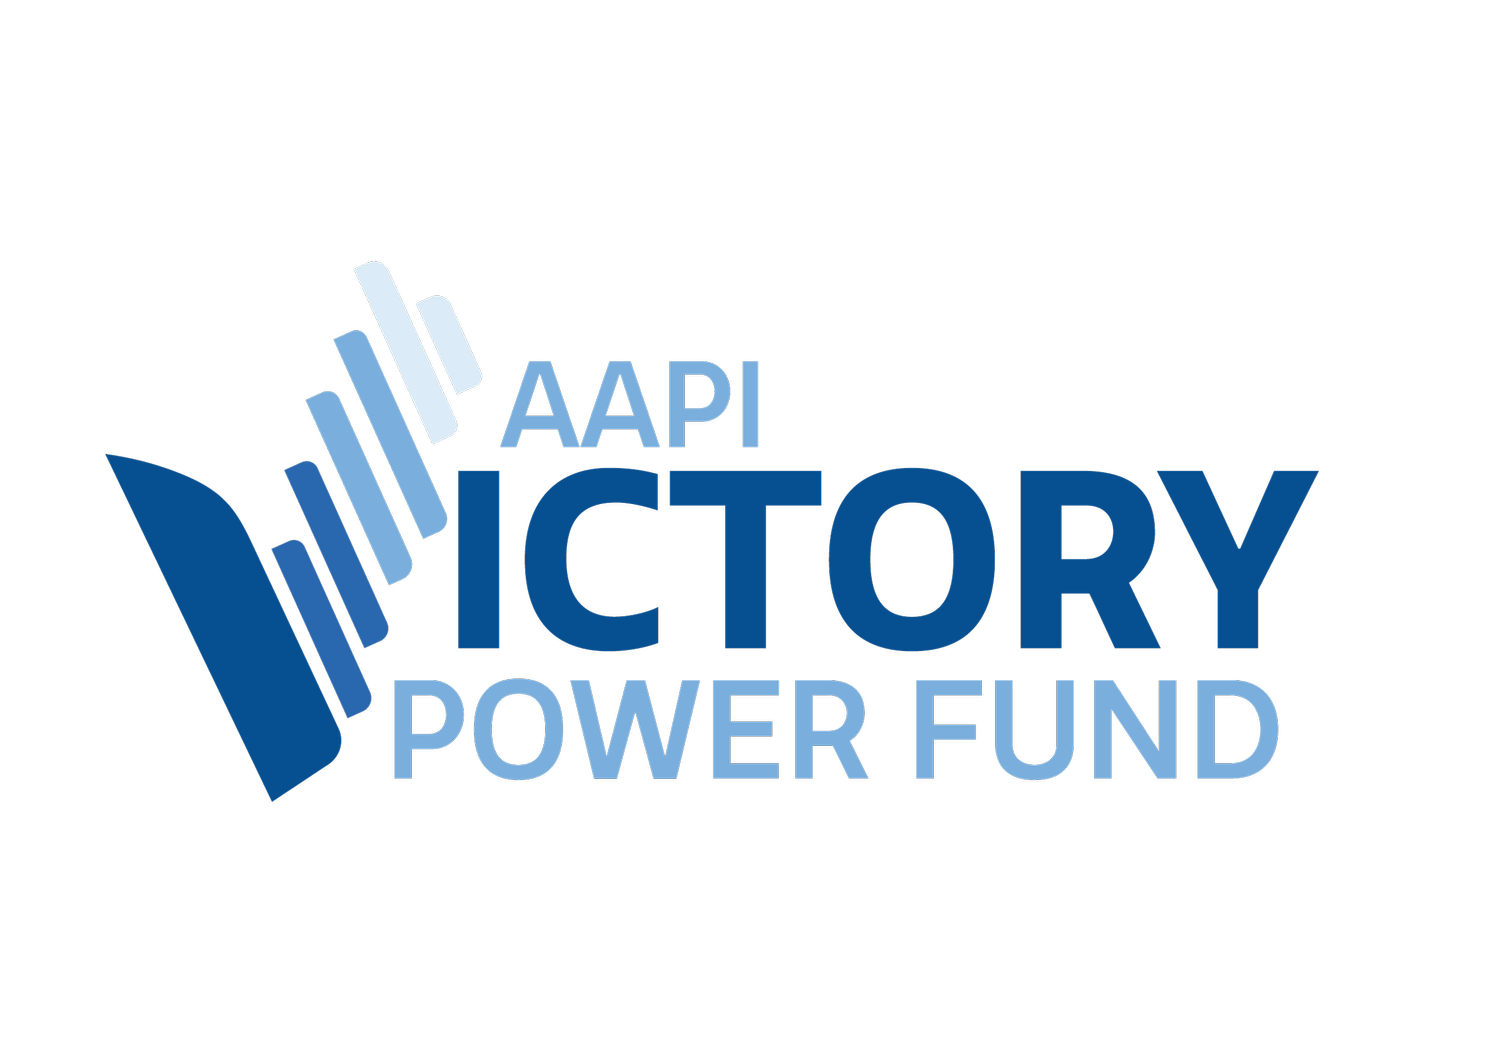 AAPI Victory Power Fund